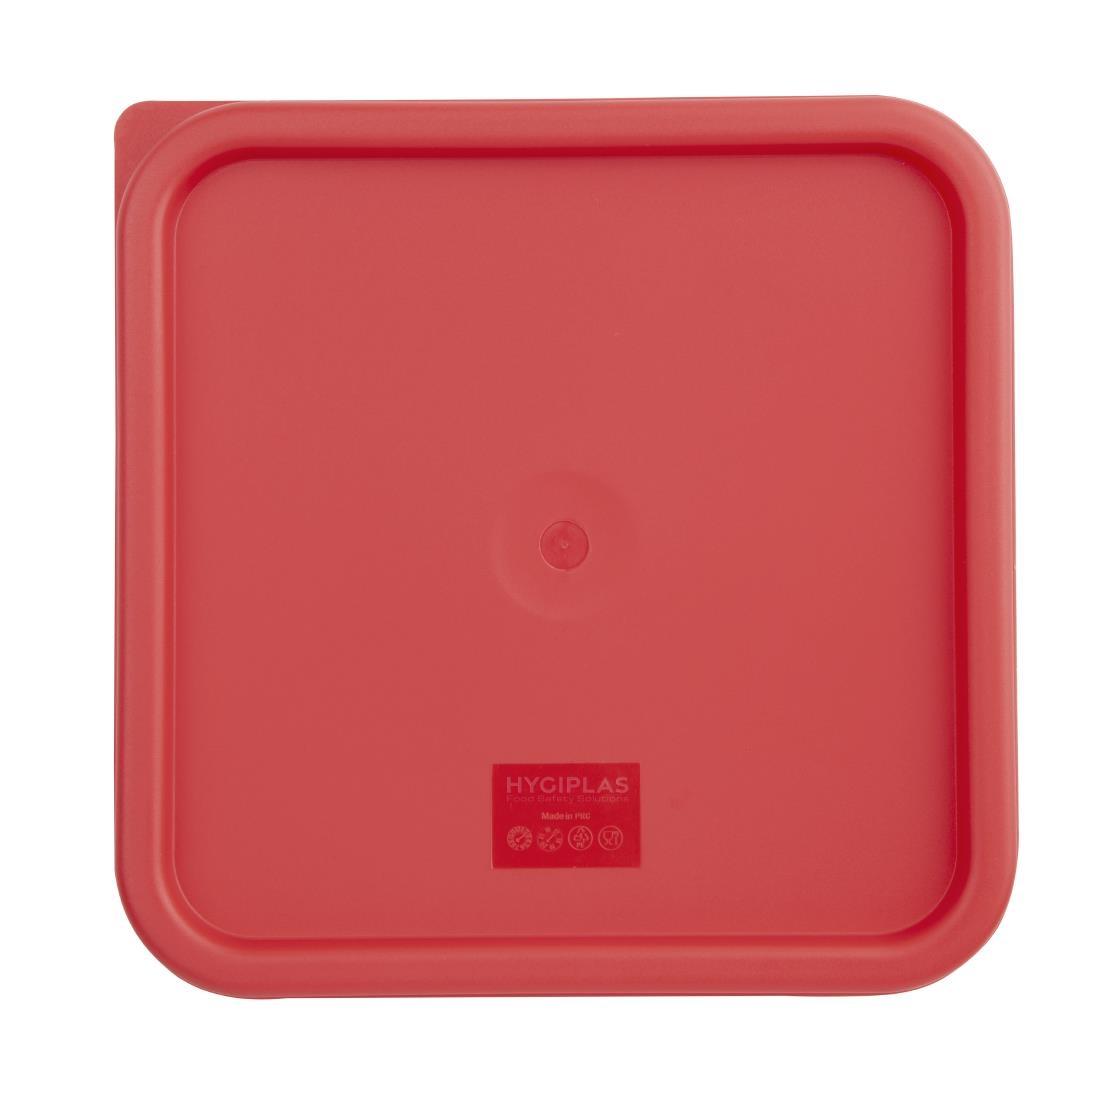 Hygiplas Square Food Storage Container Lid Red Large - CF042  - 1